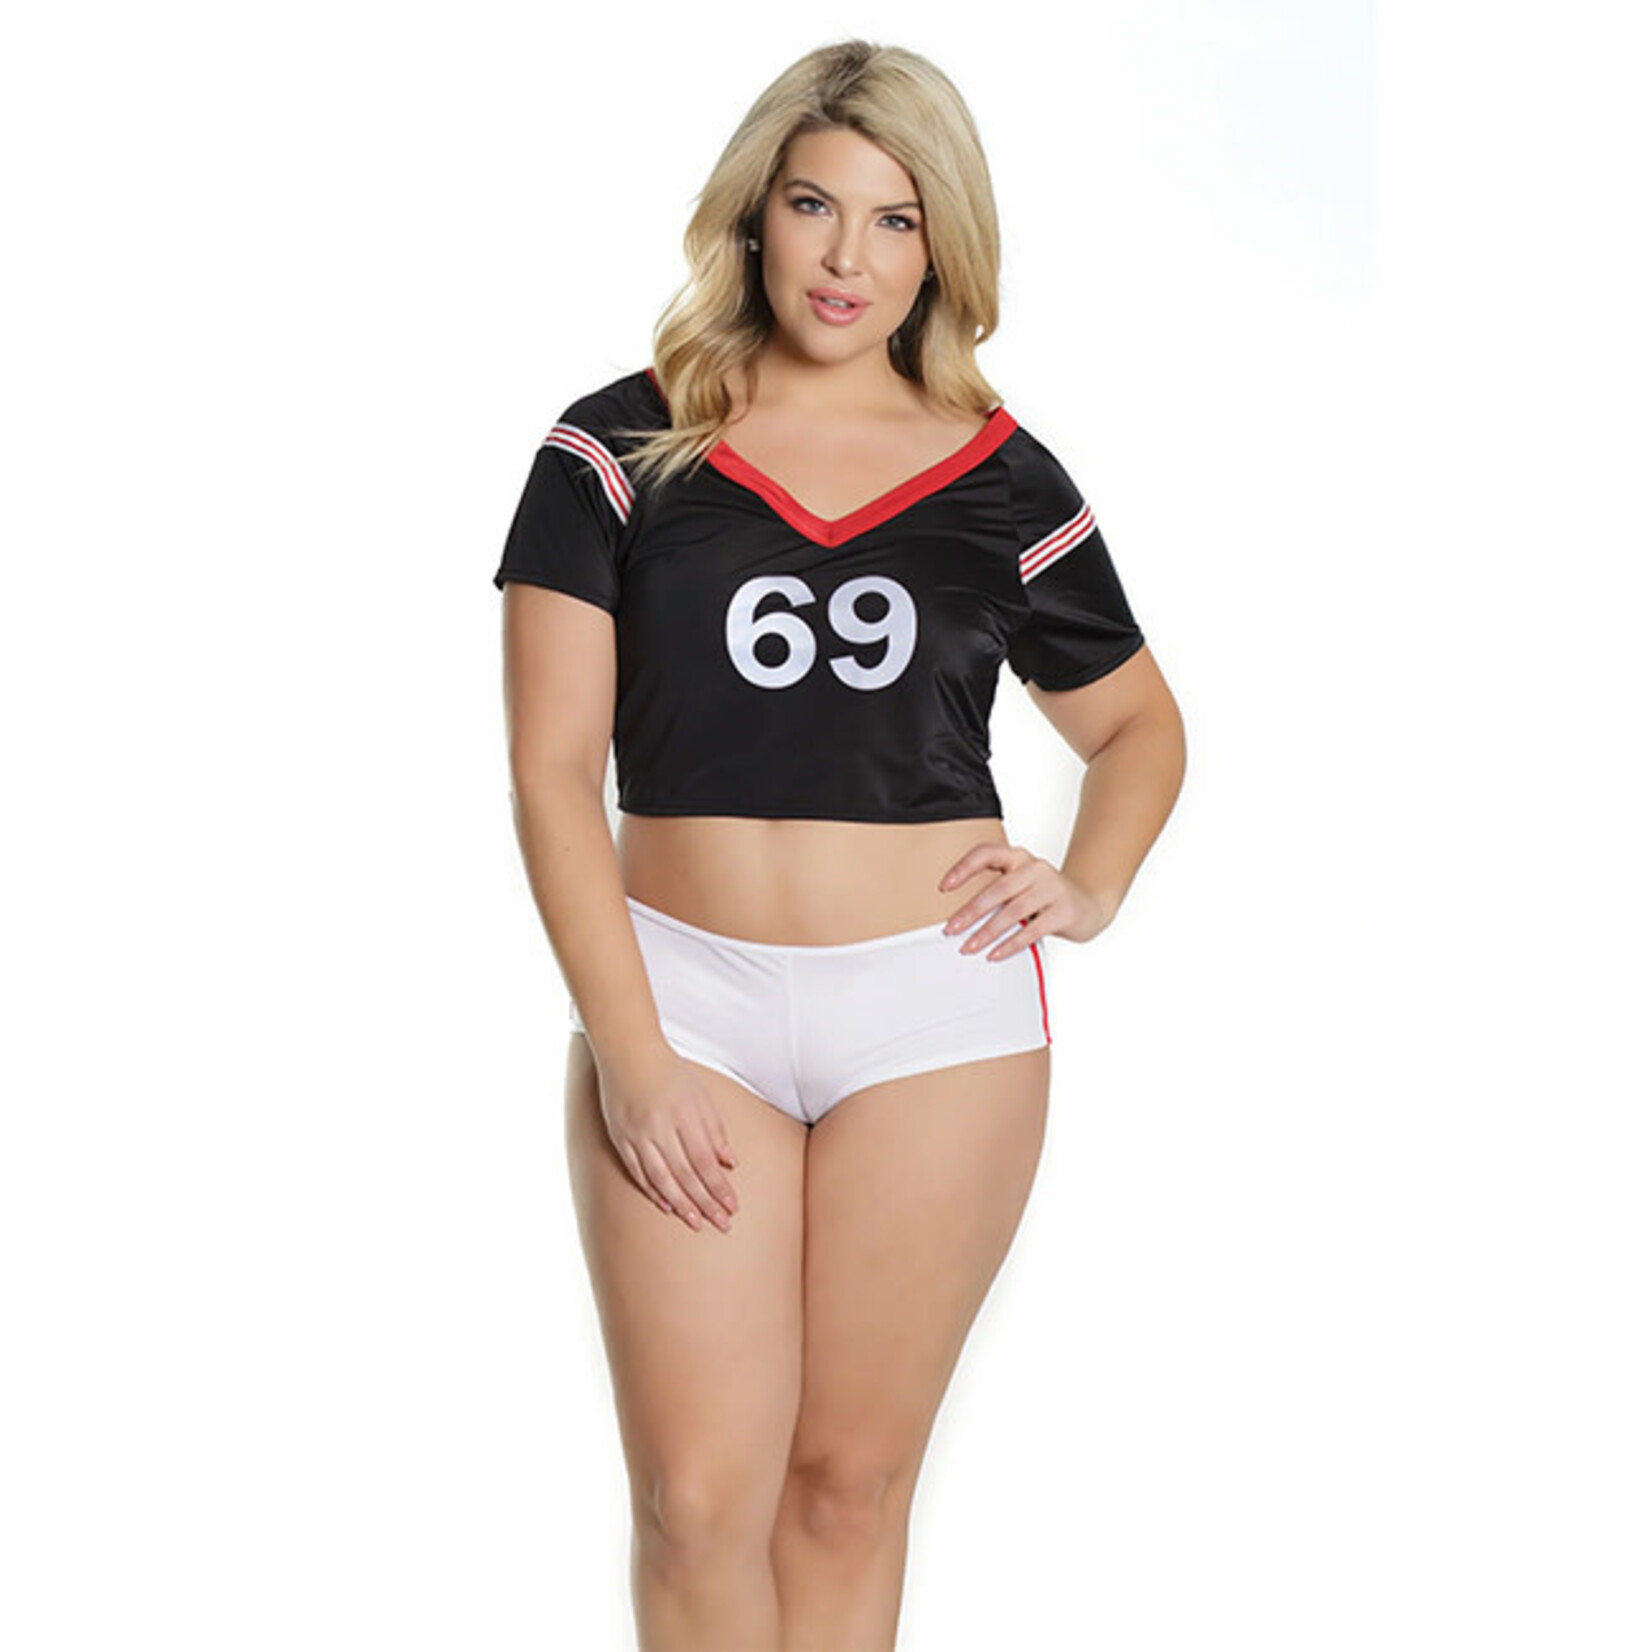 Coquette Coquette Crop Top Jersey with Shorts Lingerie Costume